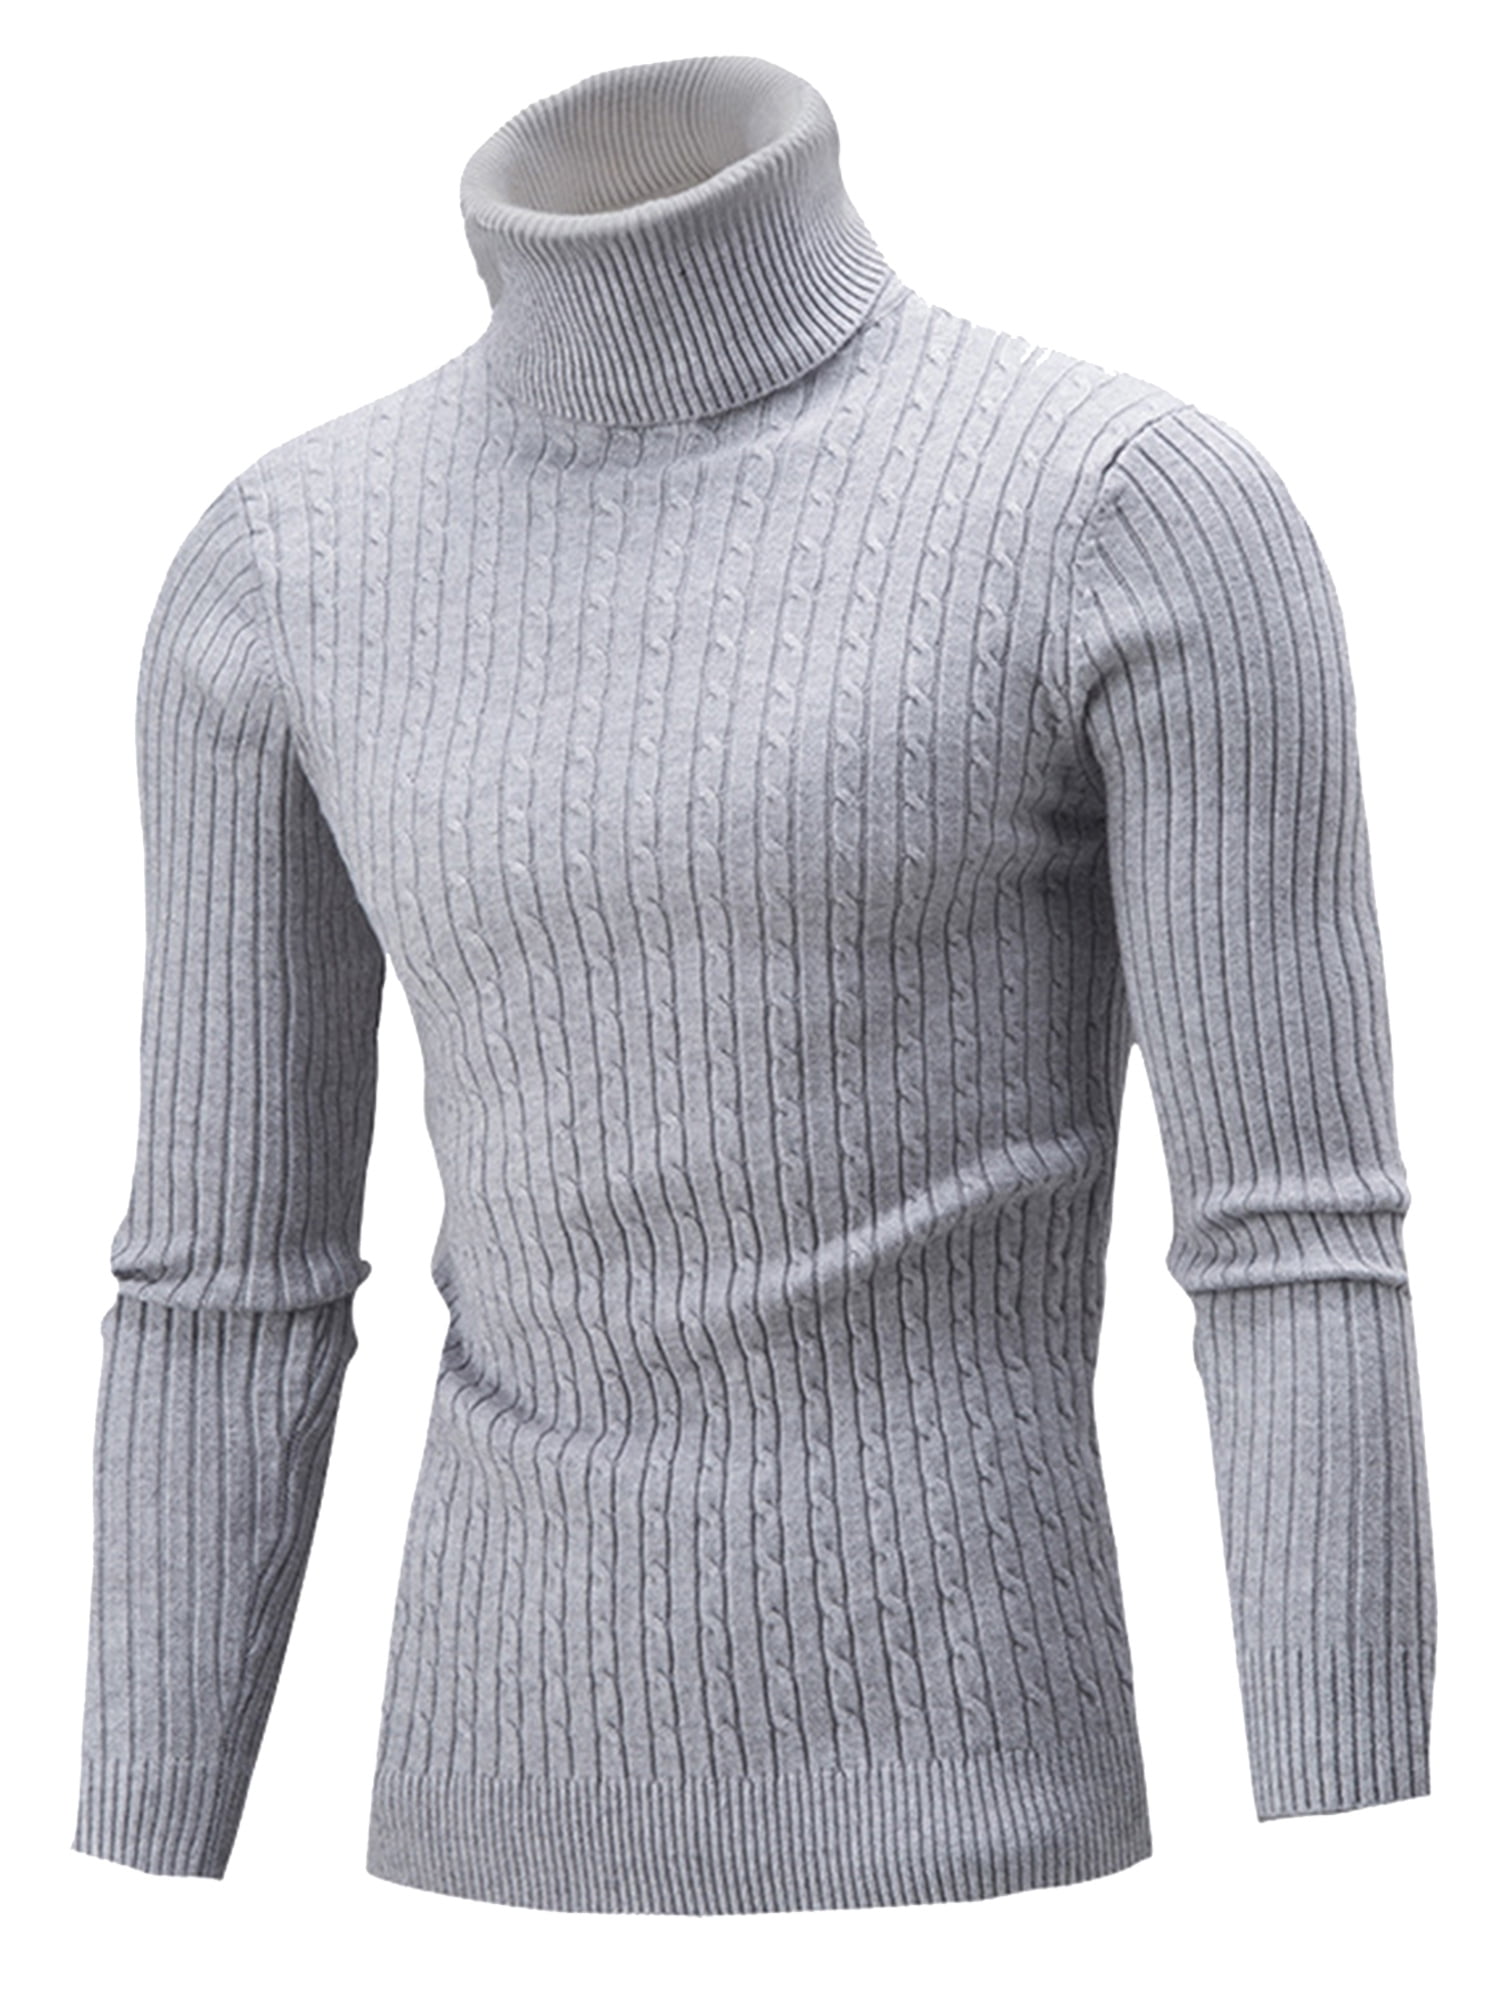 Beloved Mens Turtleneck Casual Slim Fit Knitted Cable Sweater Pullover 